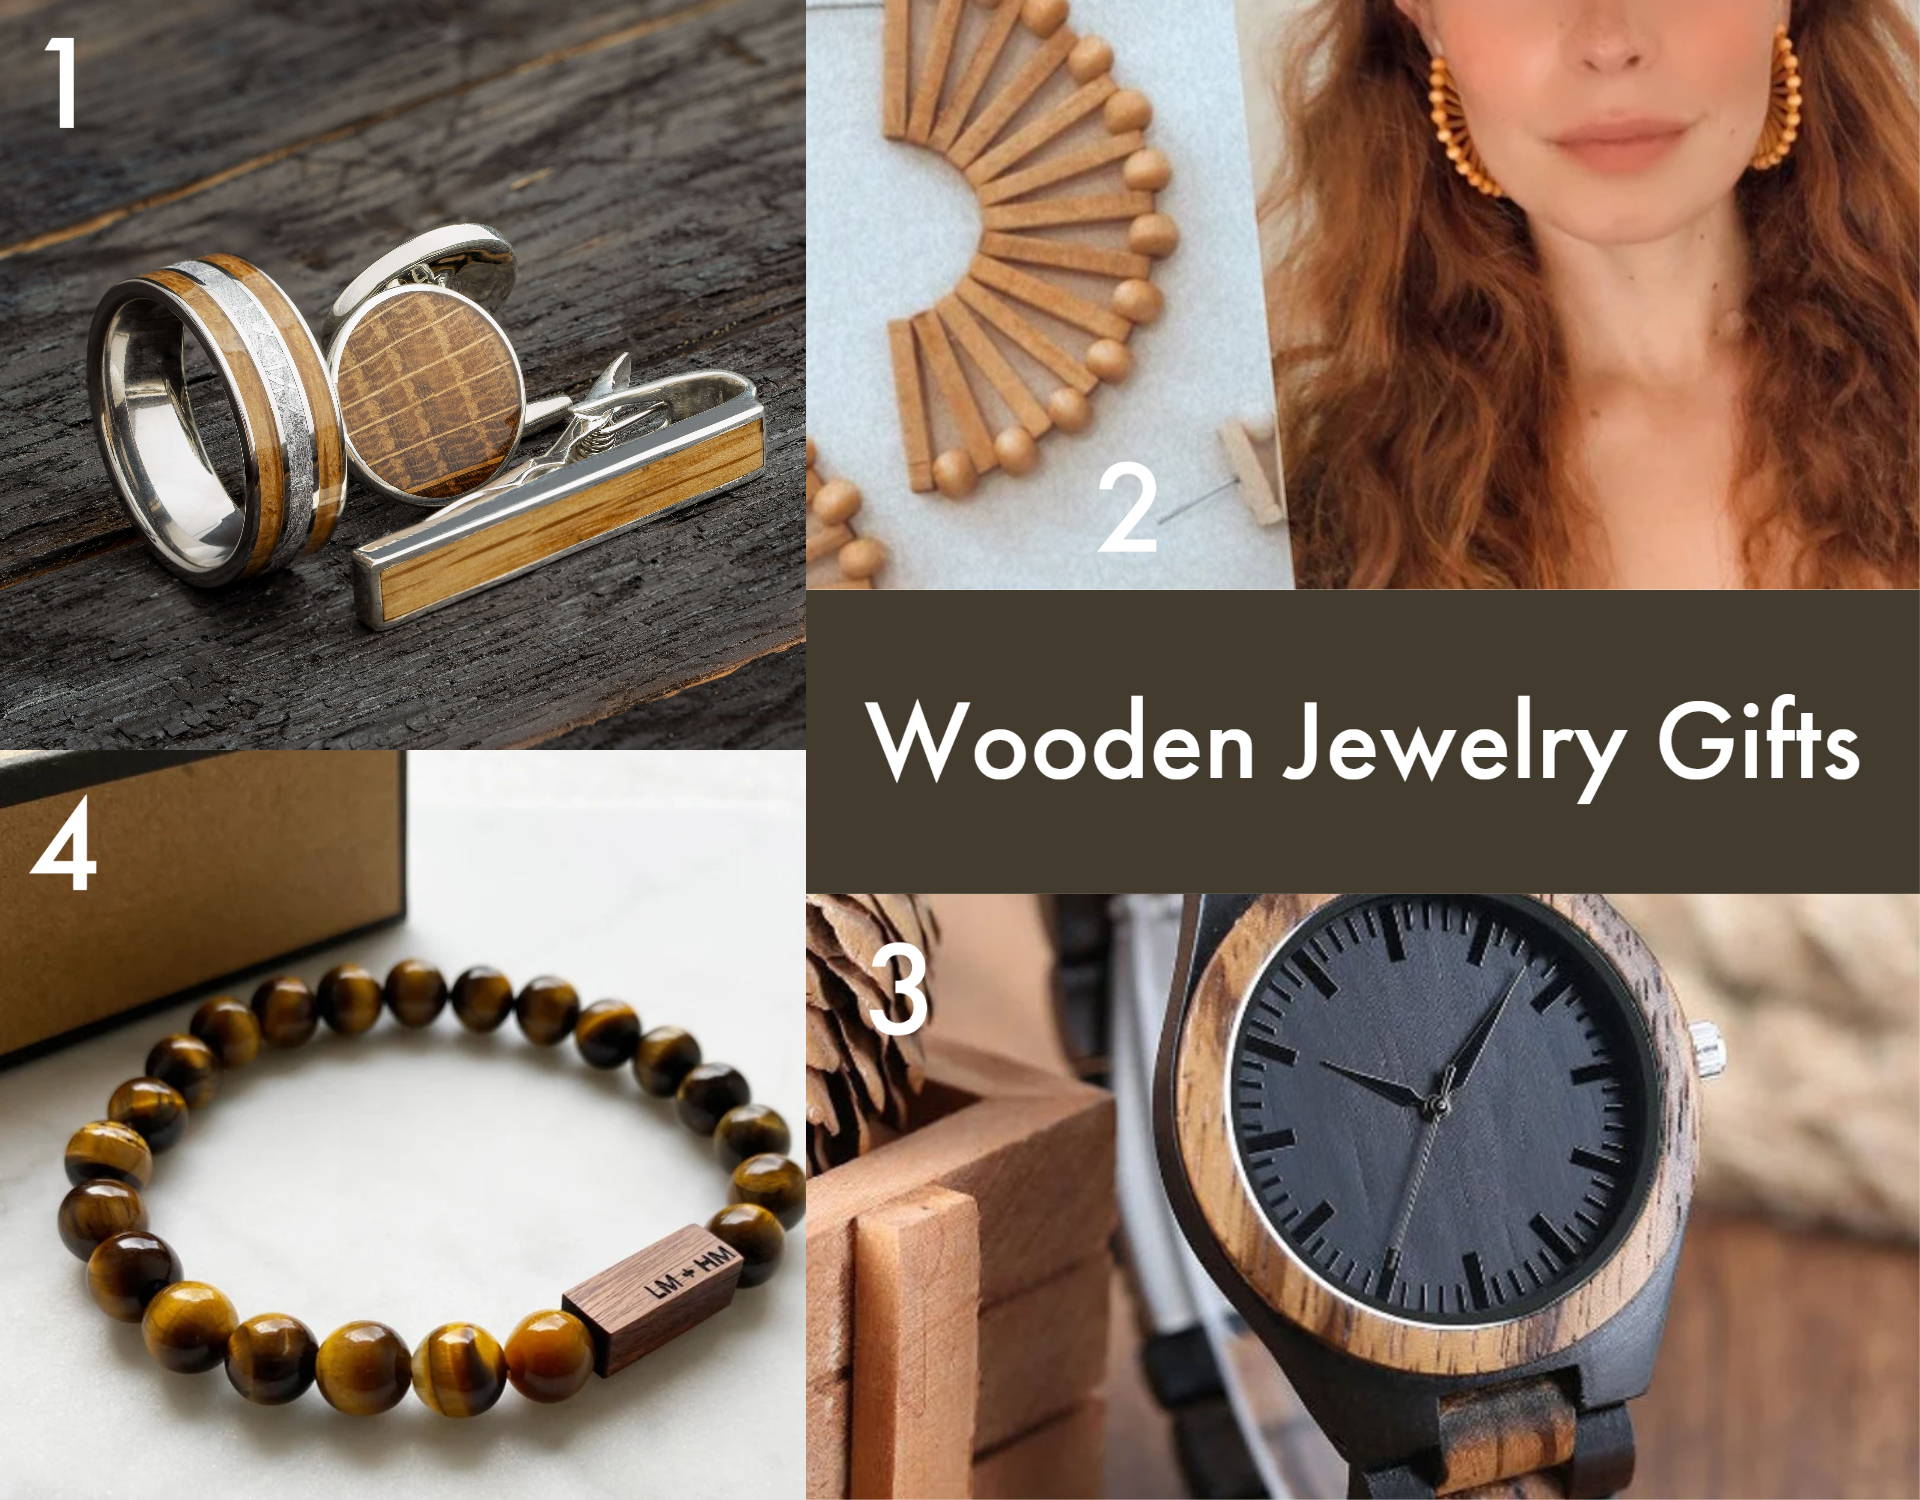 Wooden Jewelry Ideas to Gift for Five Year Anniversary